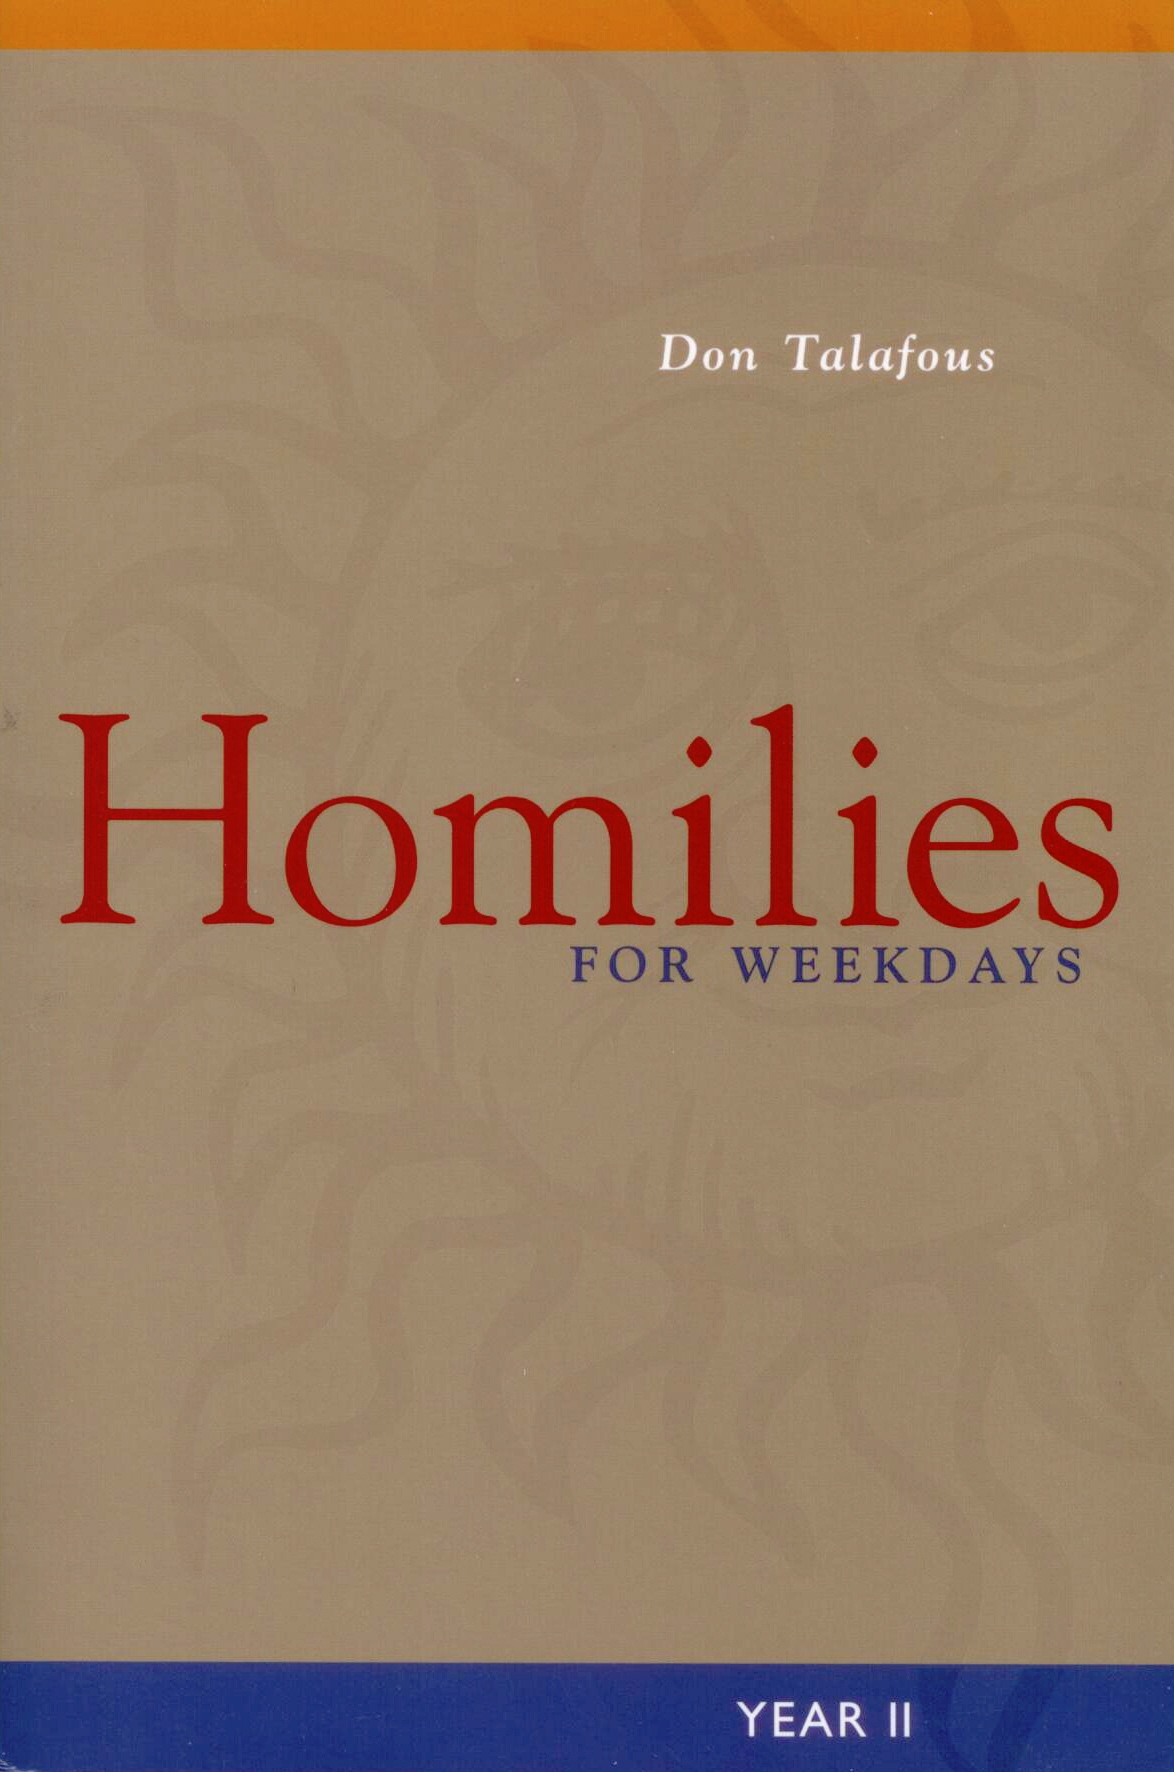 Homilies For Weekdays Year II, by Don Talafous #9780814630324